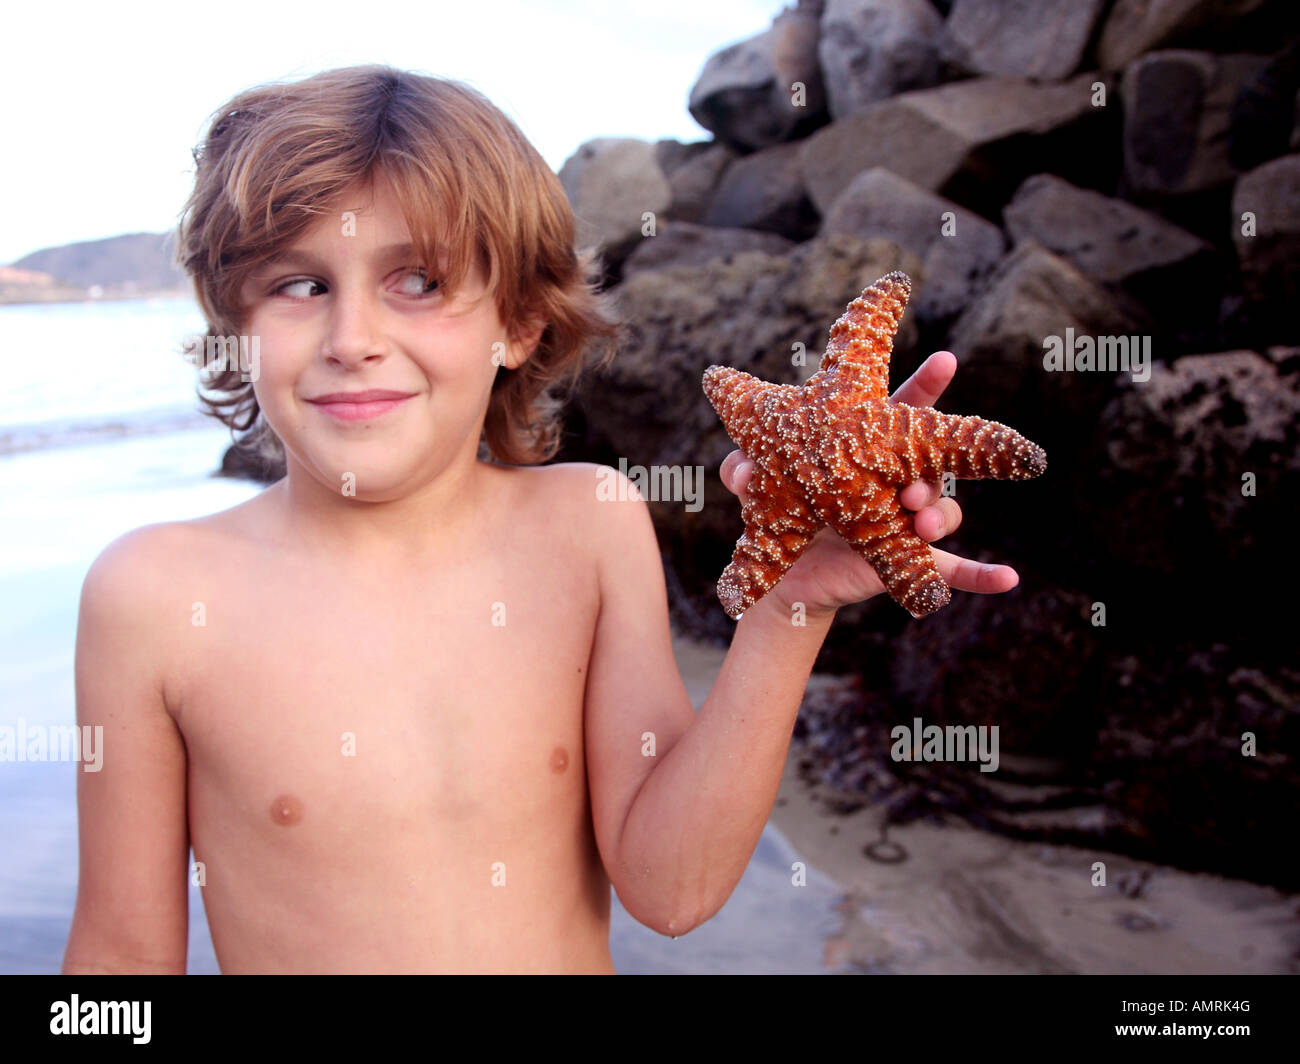 Young boy holding star fish Banque D'Images